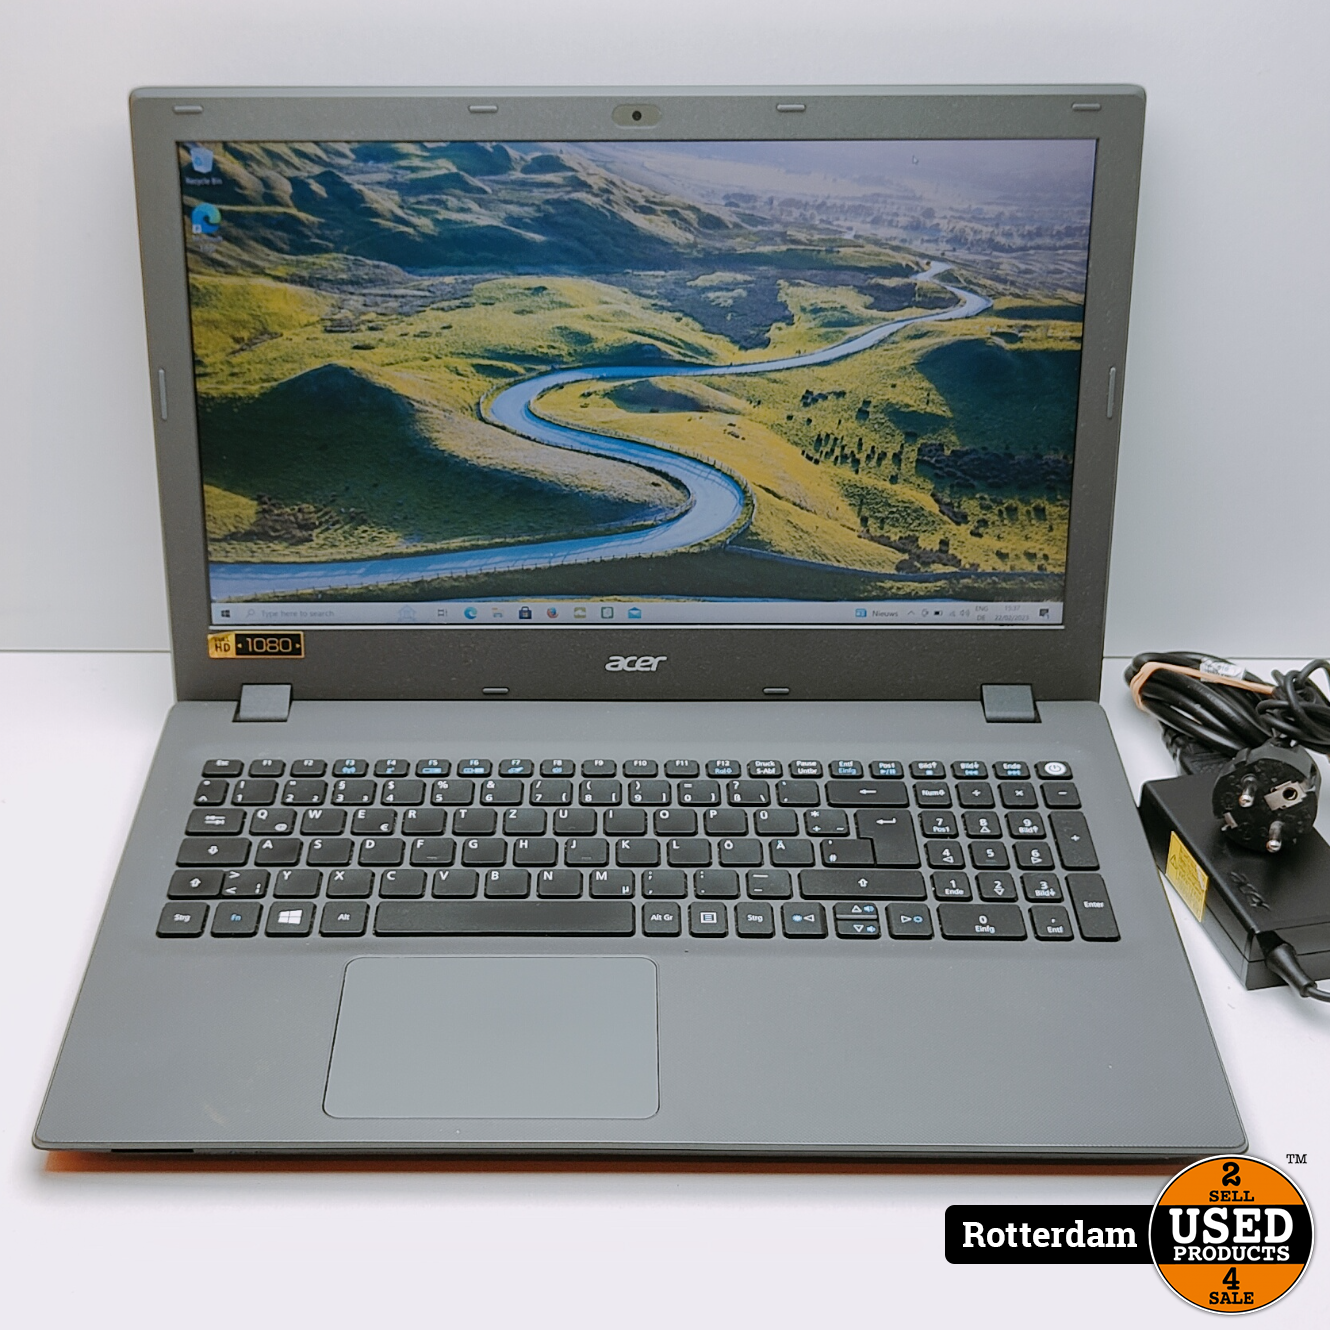 Acer Aspire E5-573g-51ts Garantie - Used Products Rotterdam